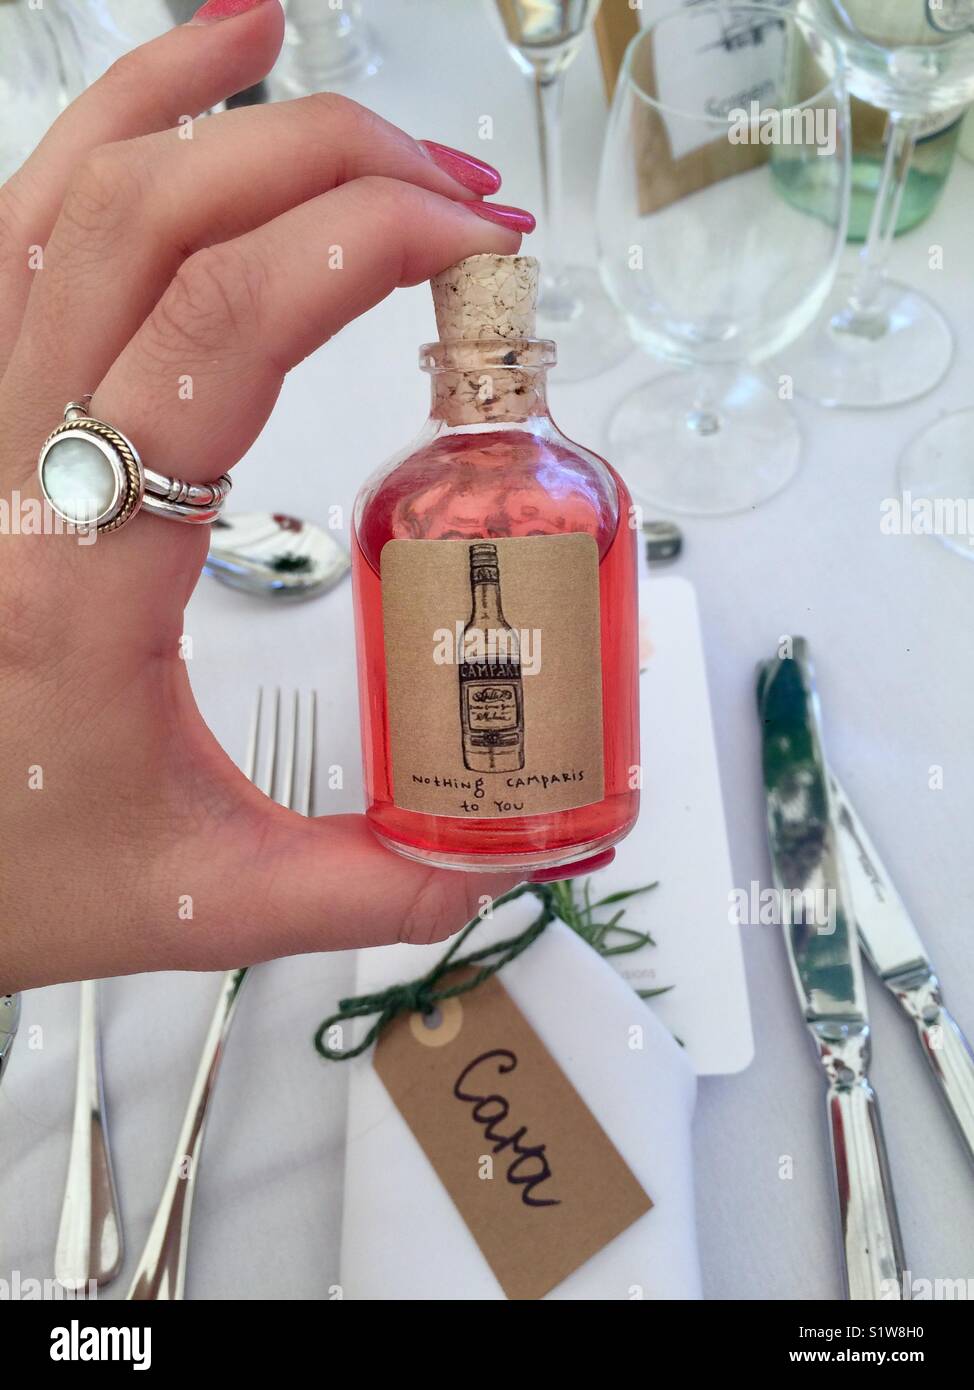 Mini bottle of Campari held in hand as wedding favour Stock Photo